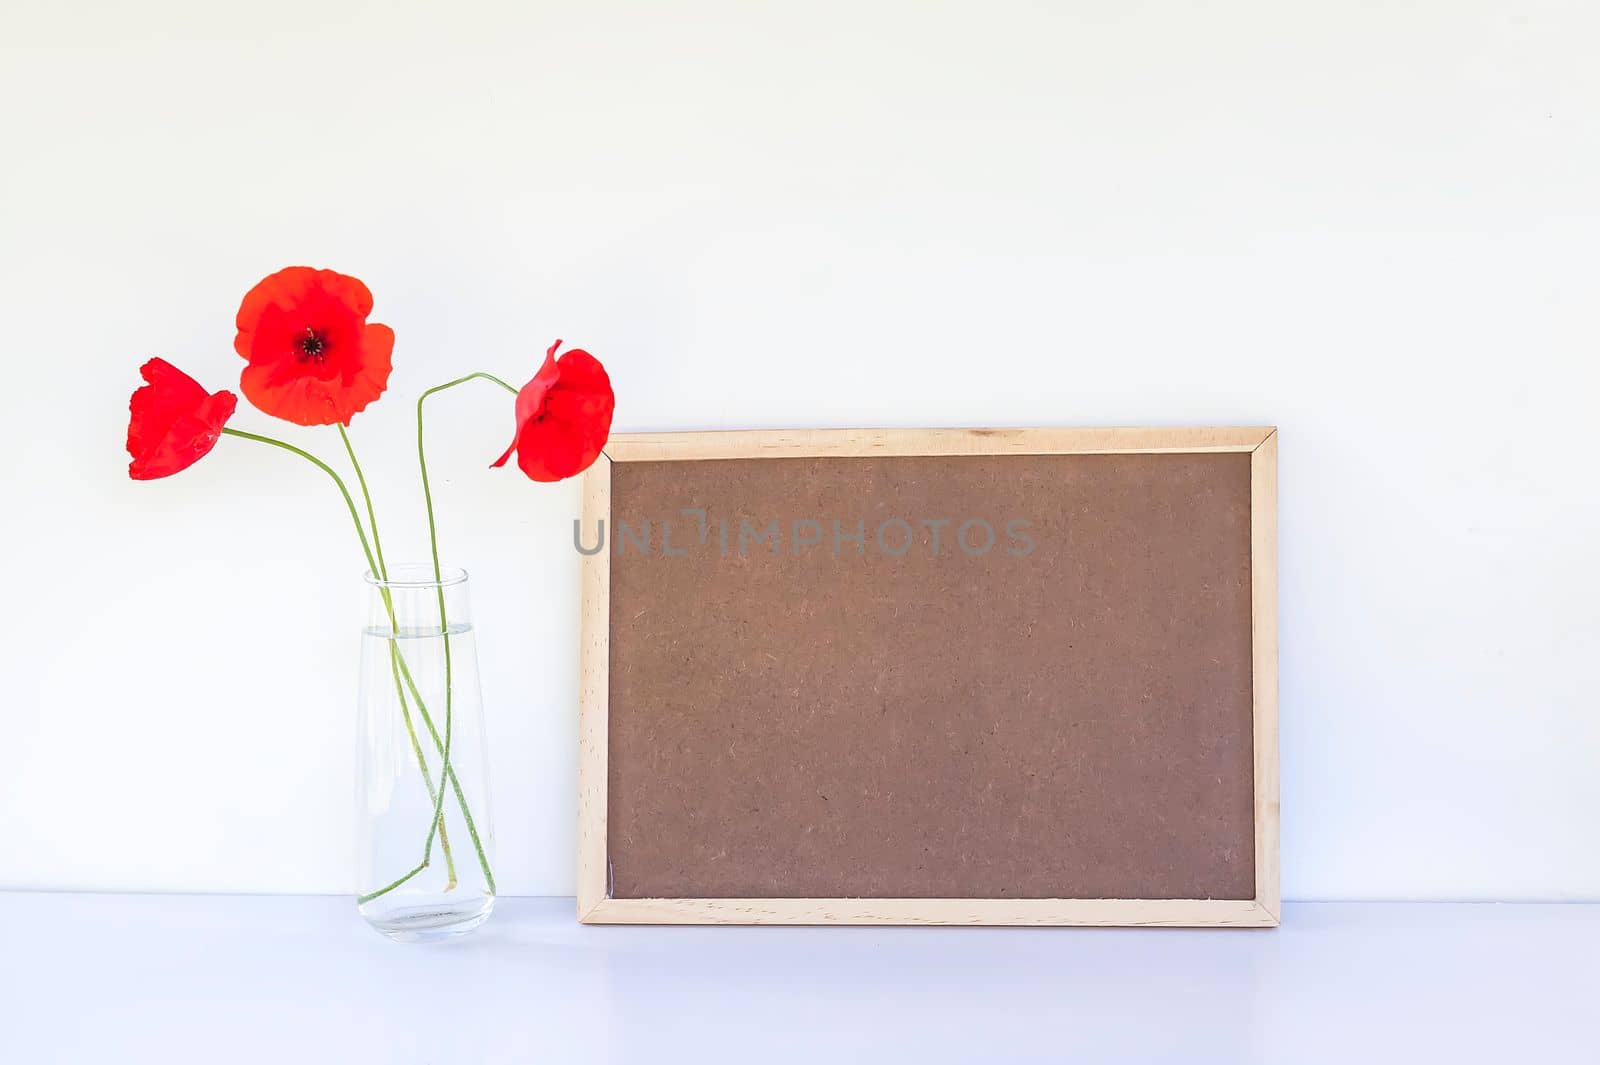 Empty board and bouquet of red poppies on a white background.